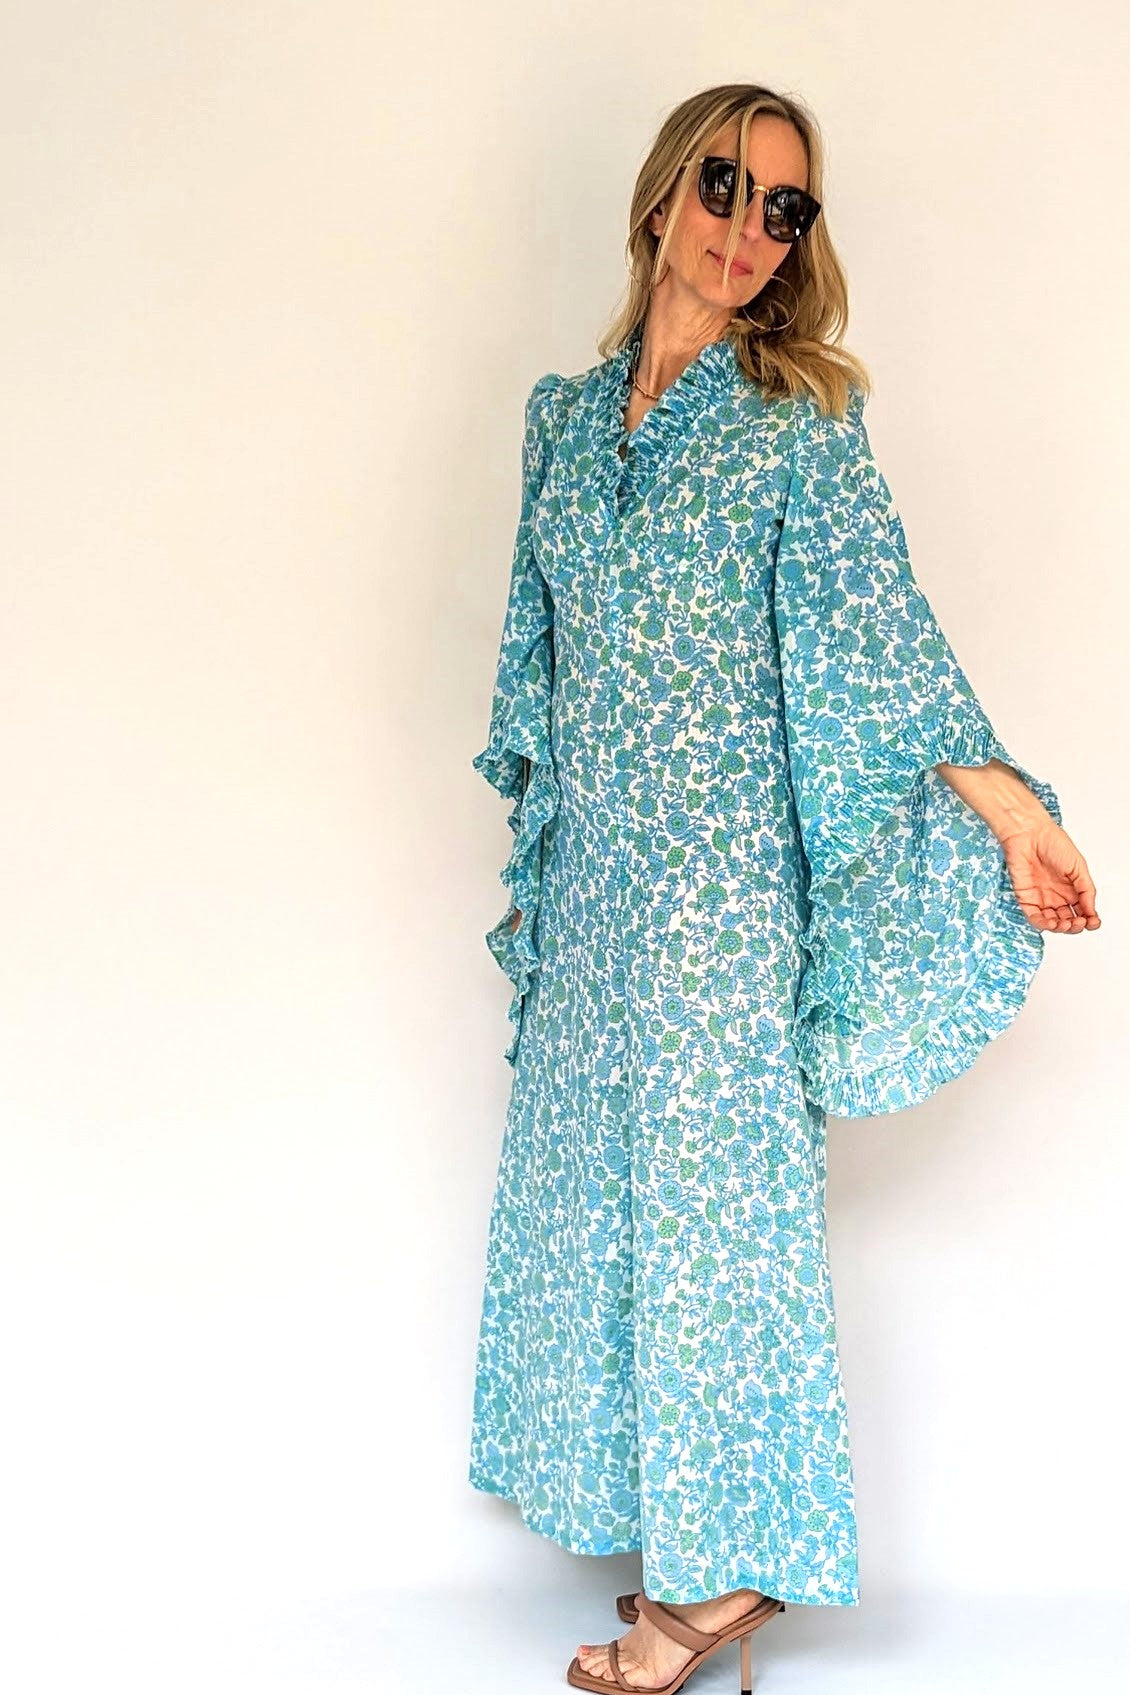 Vintage 70s Maxi Summer Dress with Statement Flared Sleeve